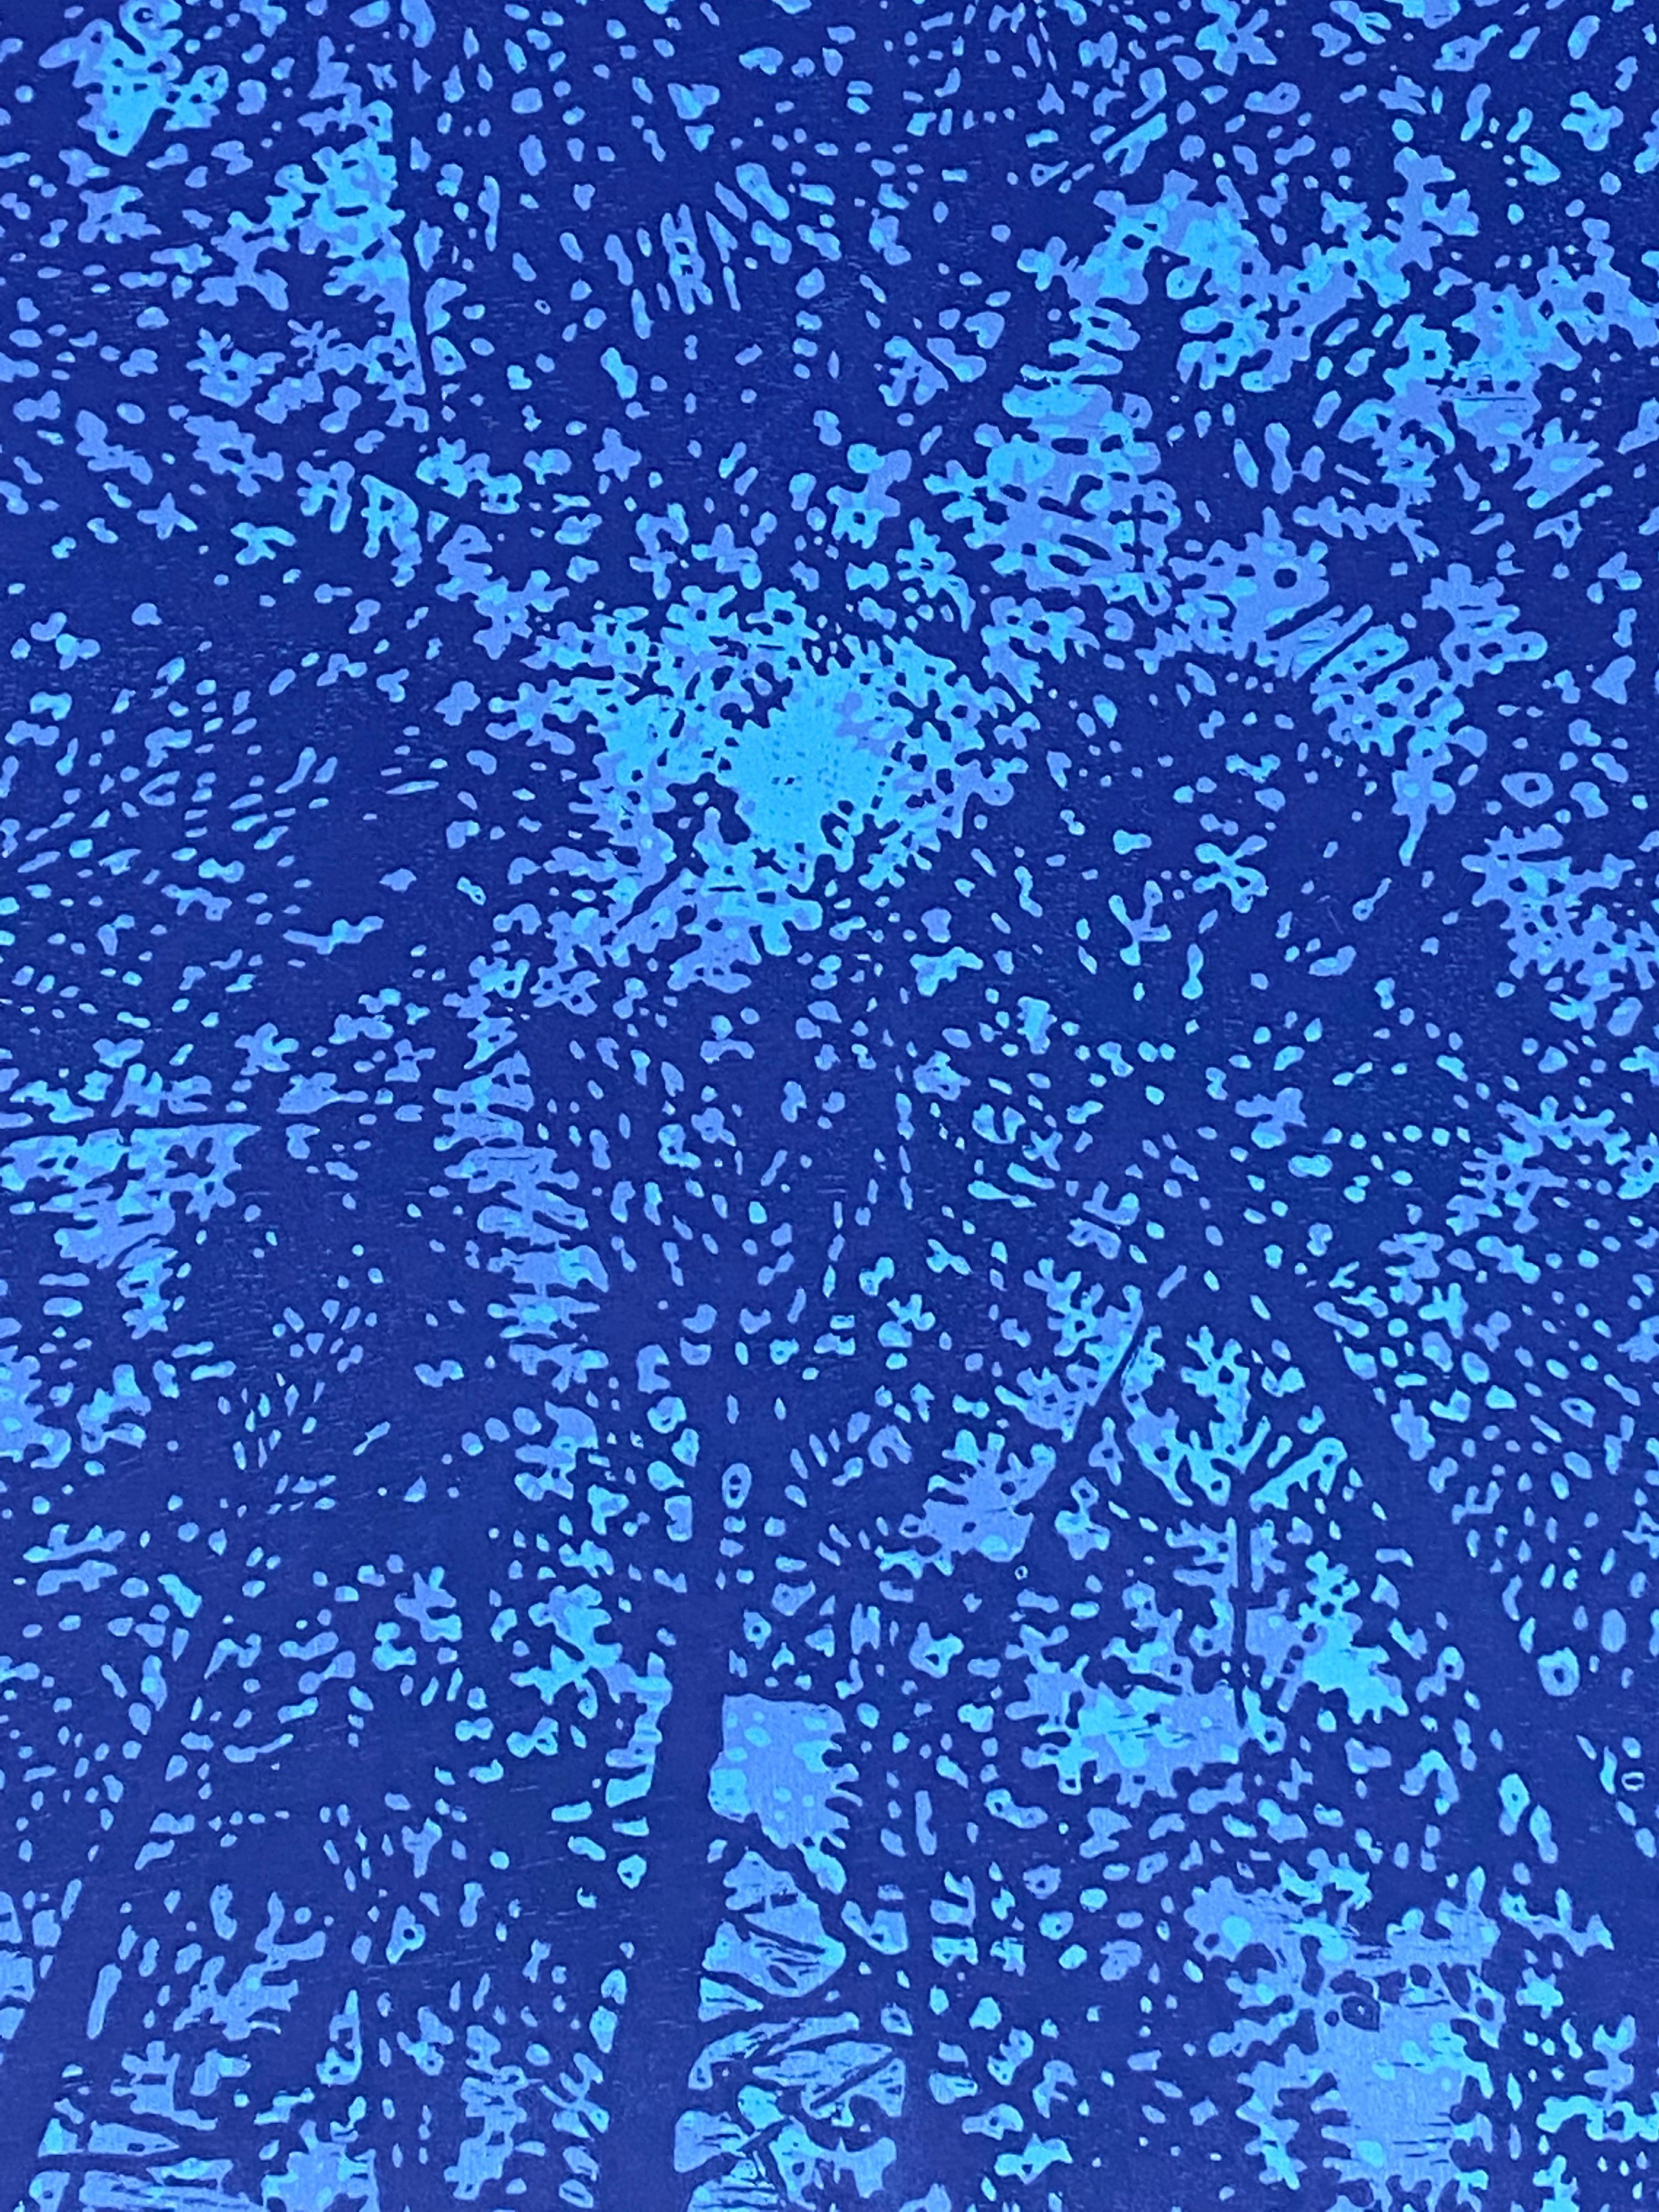 This woodcut print on paper is a peaceful view through a forest canopy. The symmetrical composition of trees is shades of dark blue and cobalt blue. The monotype brings to mind the tradition of Japanese printing while being distinctly contemporary.